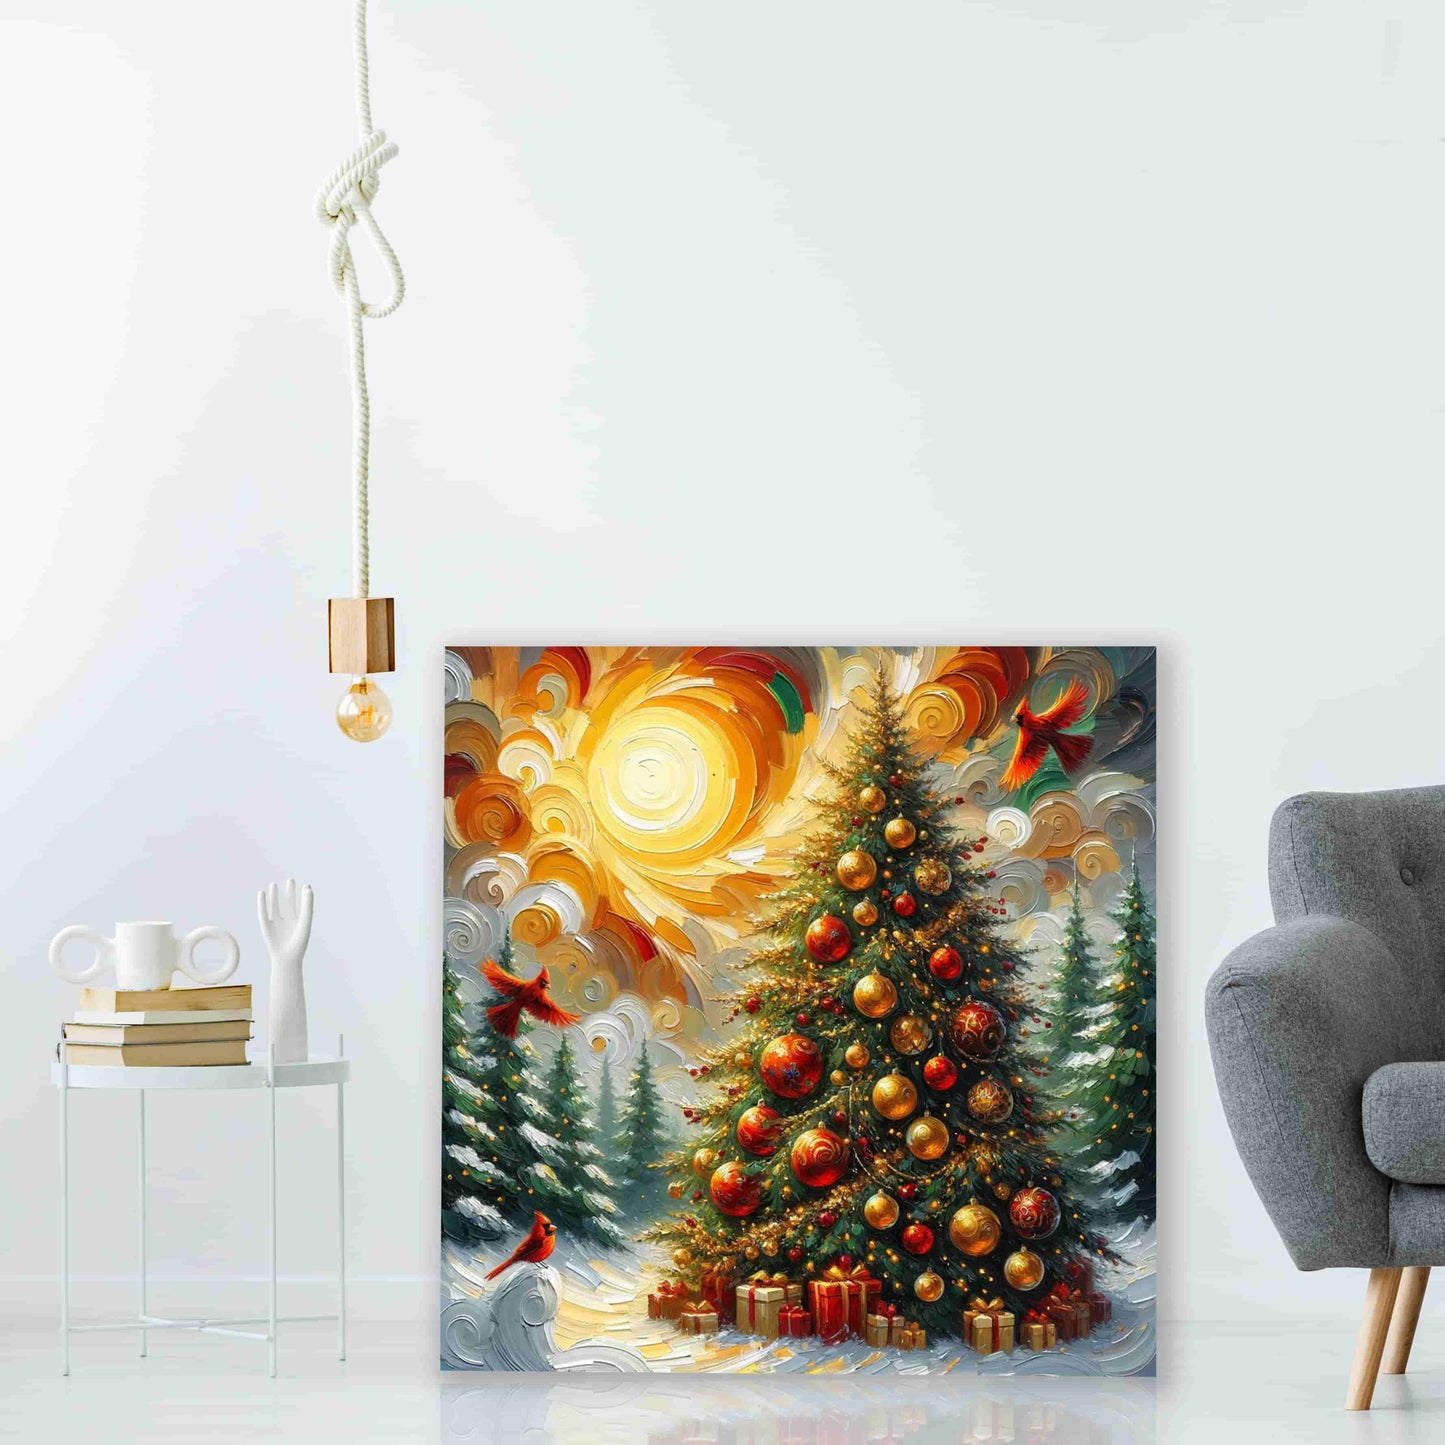 "Radiant Yuletide Morning - Cardinals and Christmas Tree" Wrapped Canvas Wall Art Prints